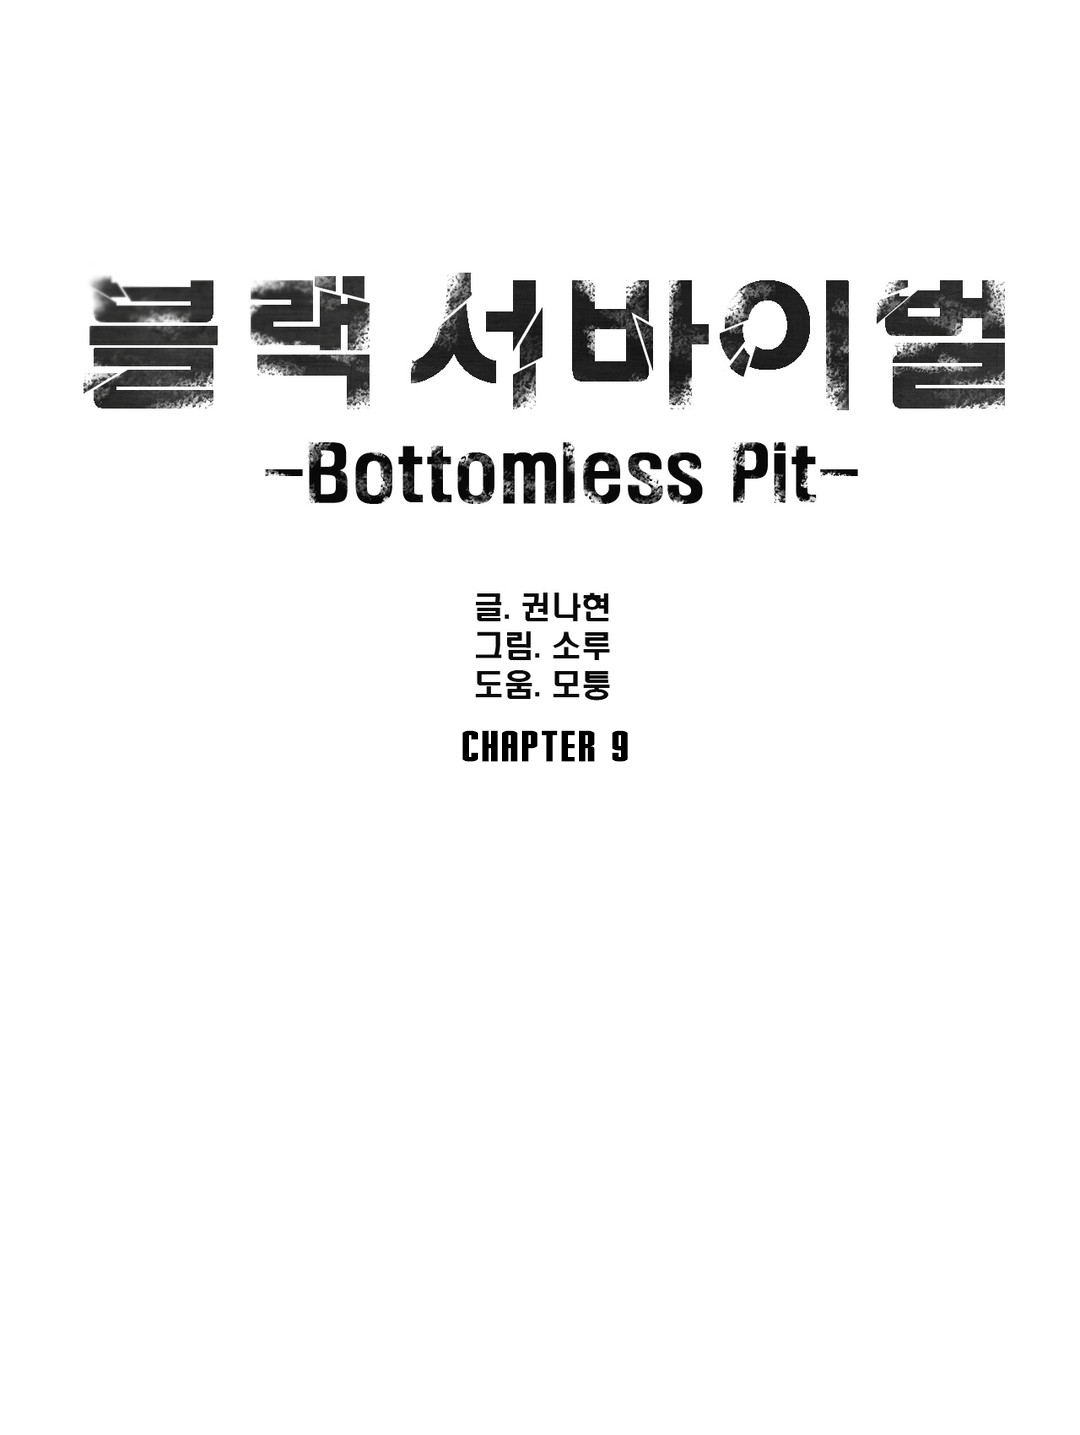 Black Survival - Bottomless Pit Chapter 9 #2